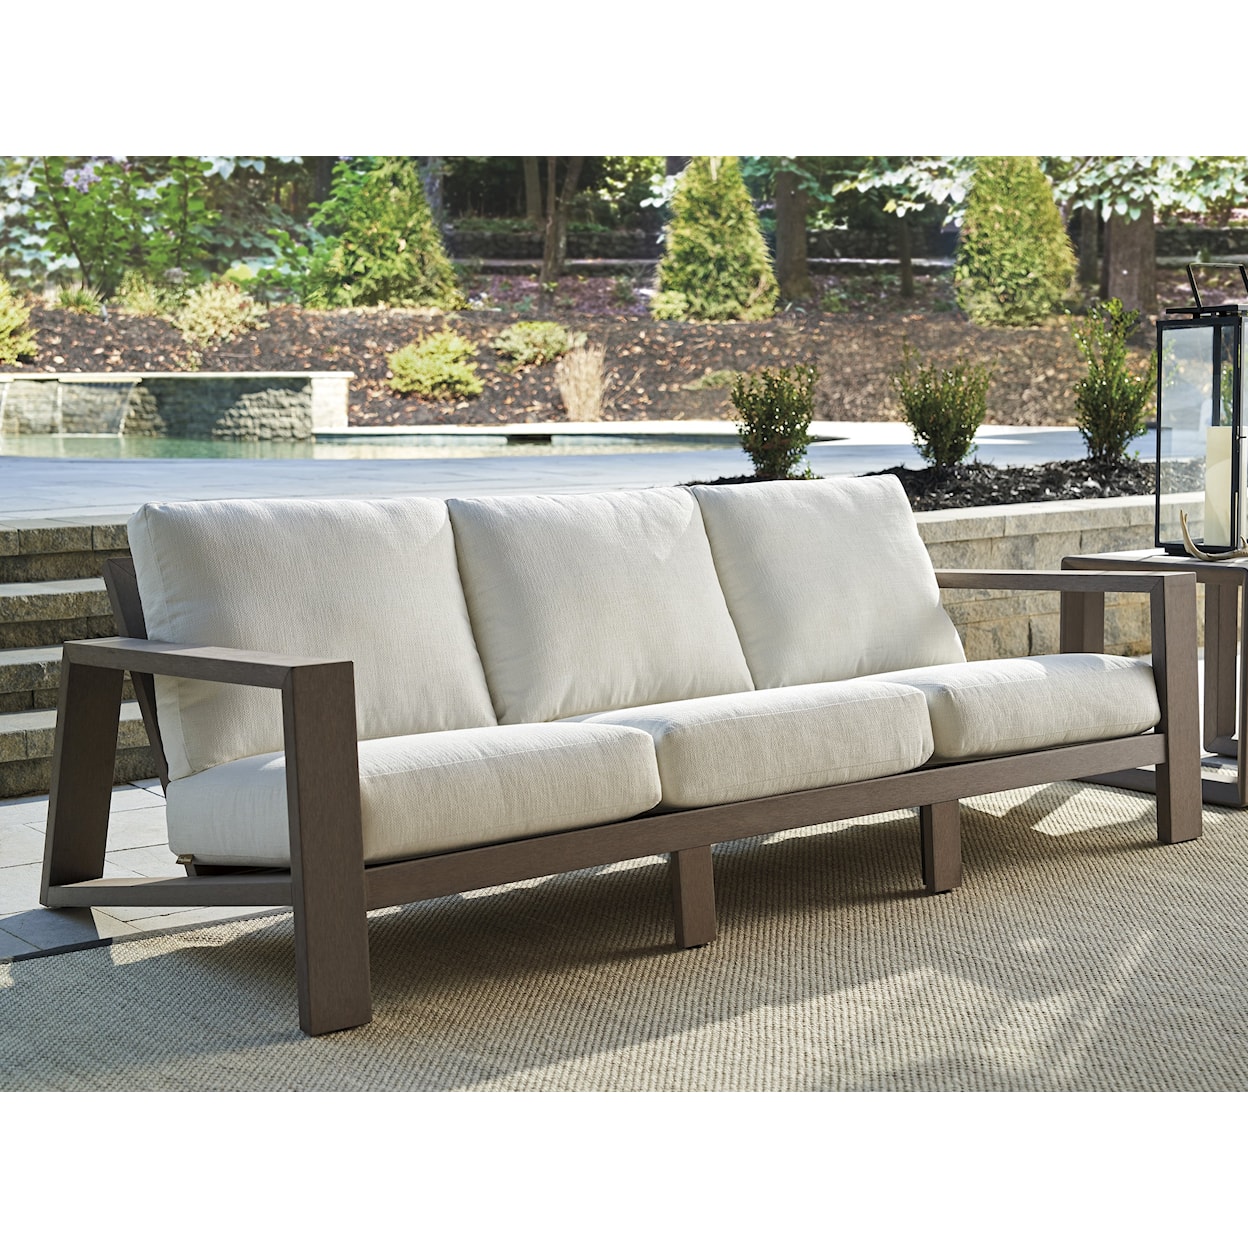 Tommy Bahama Outdoor Living Mozambique Outdoor Sofa